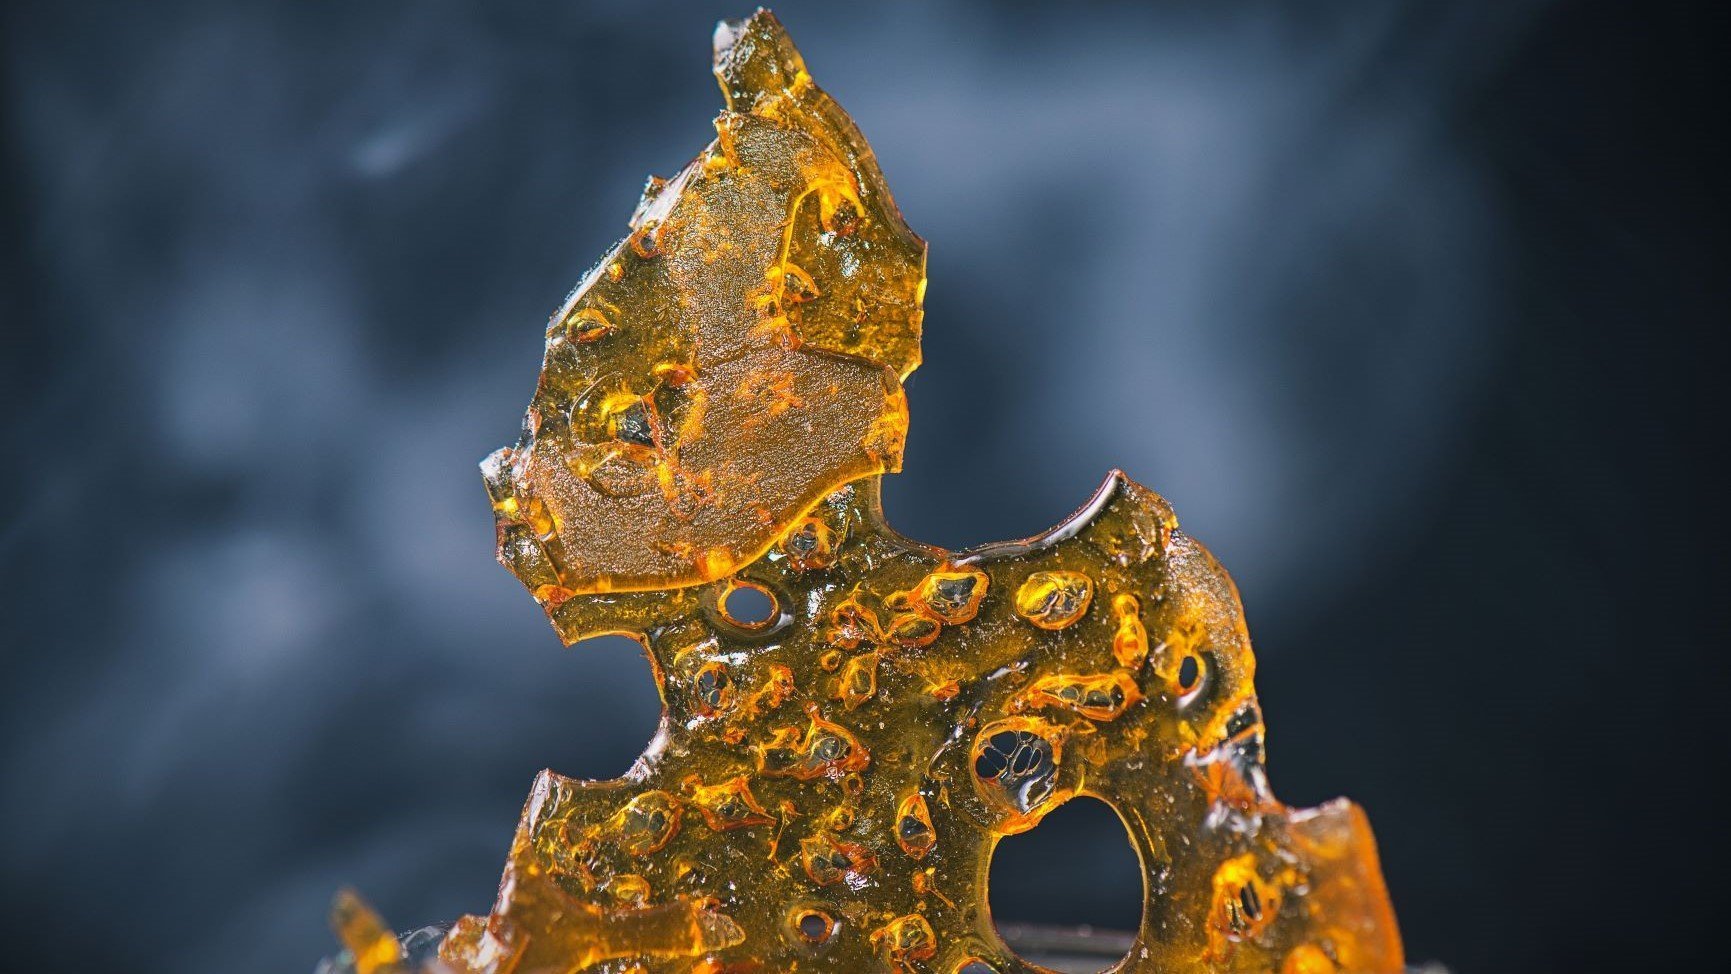 How to Store Shatter, Wax, and Dabs